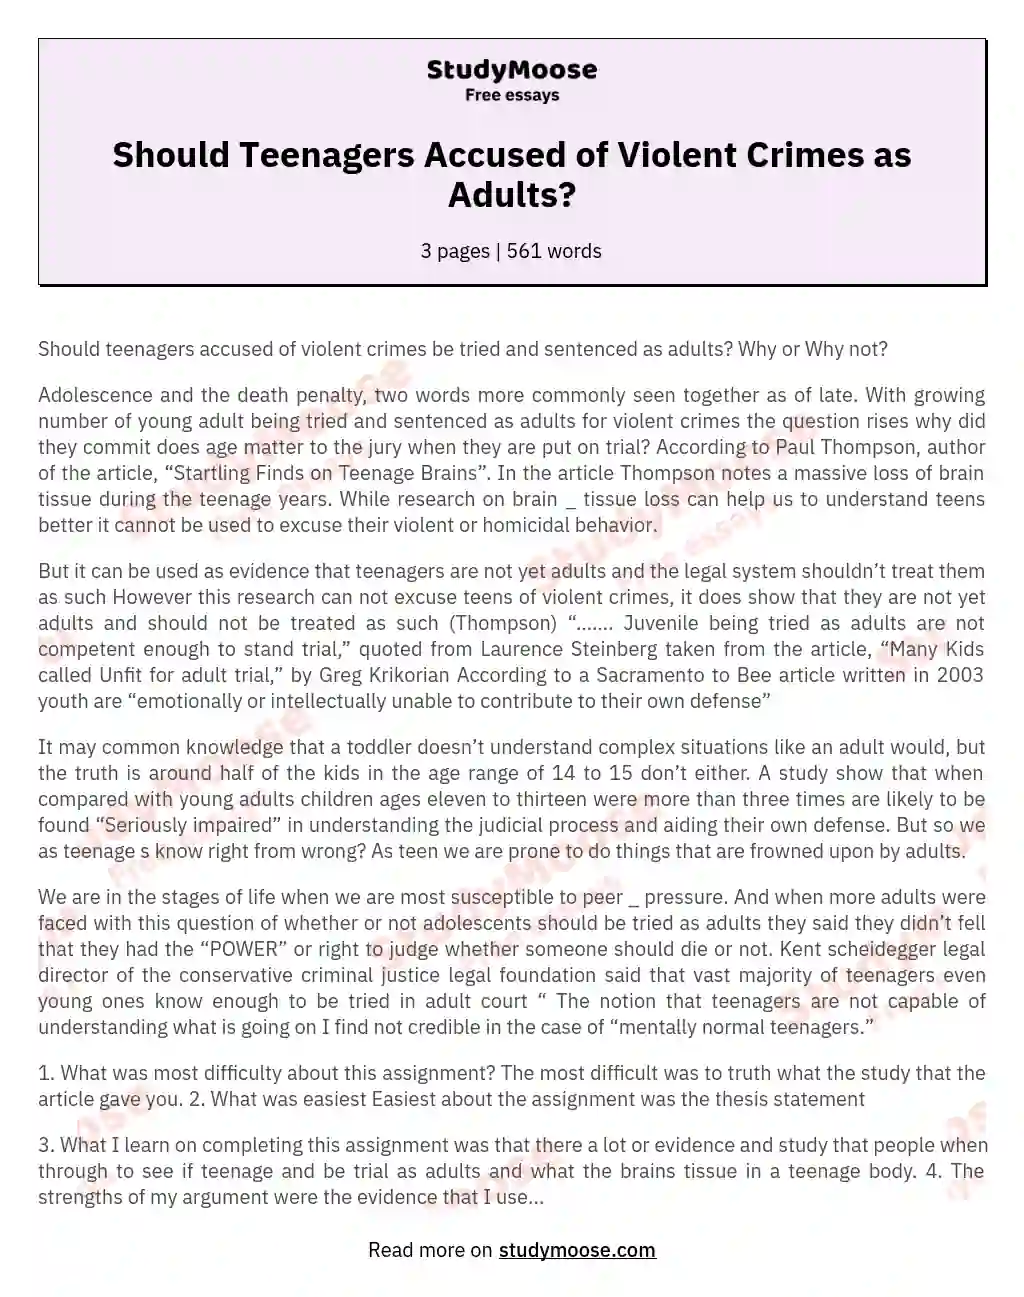 Should Teenagers Accused of Violent Crimes as Adults?